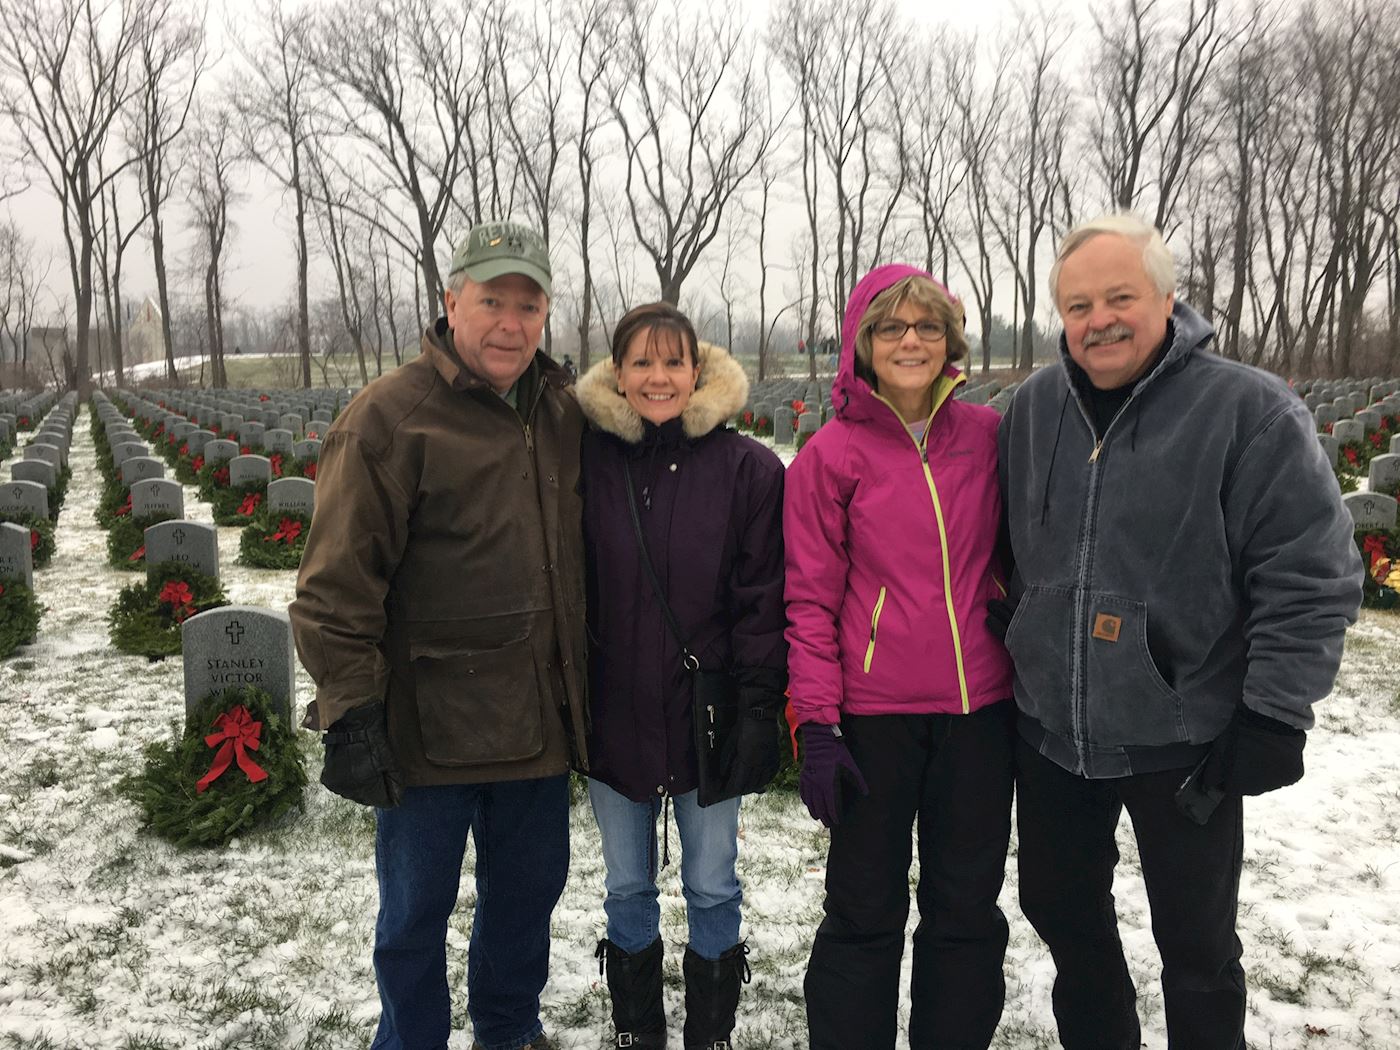 A few CVCC members that participated in the "placing" of the wreaths in 2016.